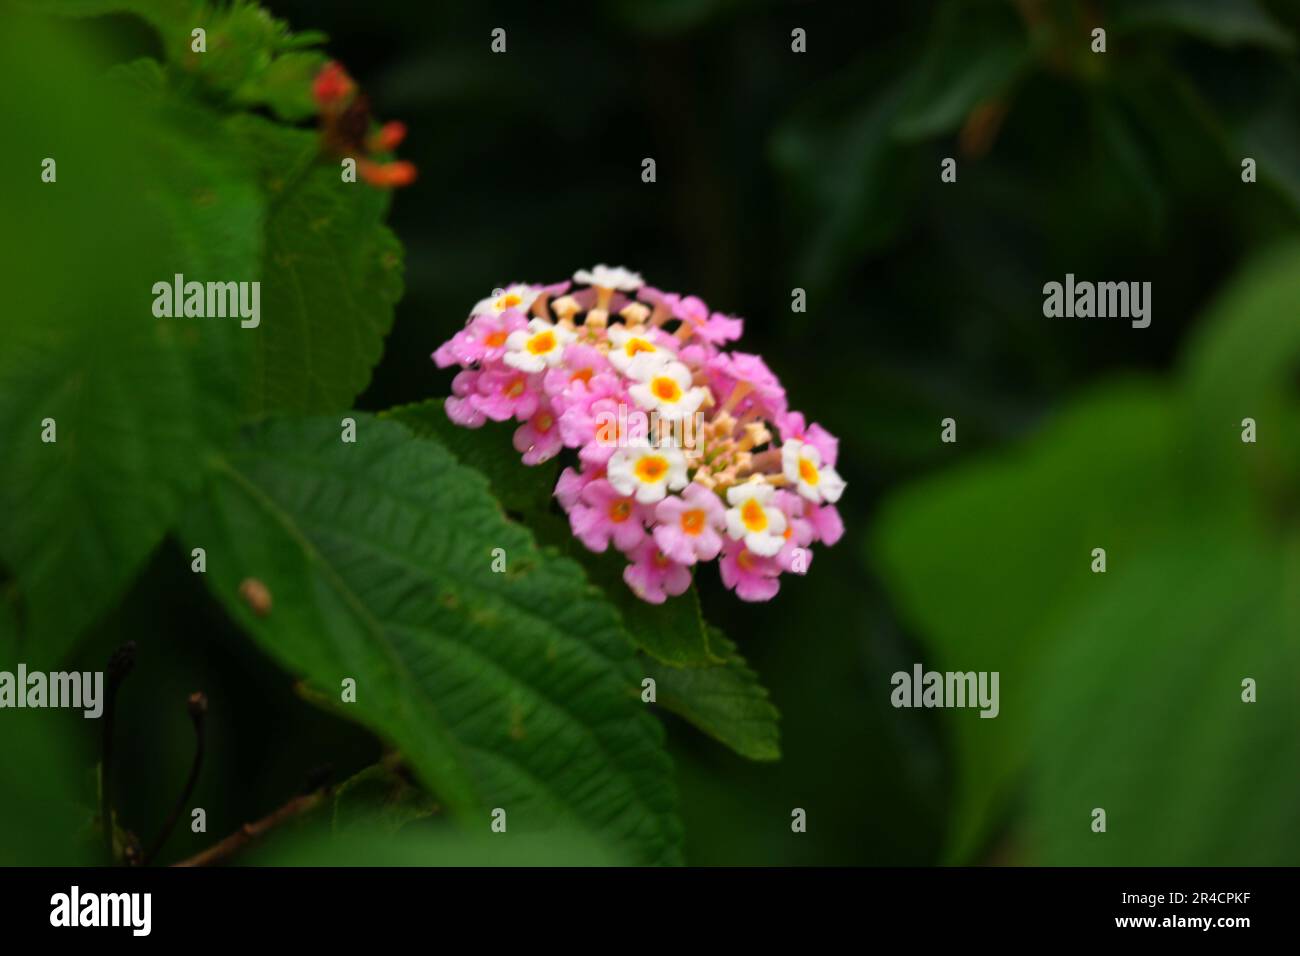 West Indian Lantana flowers with green leaves in the garden Stock Photo